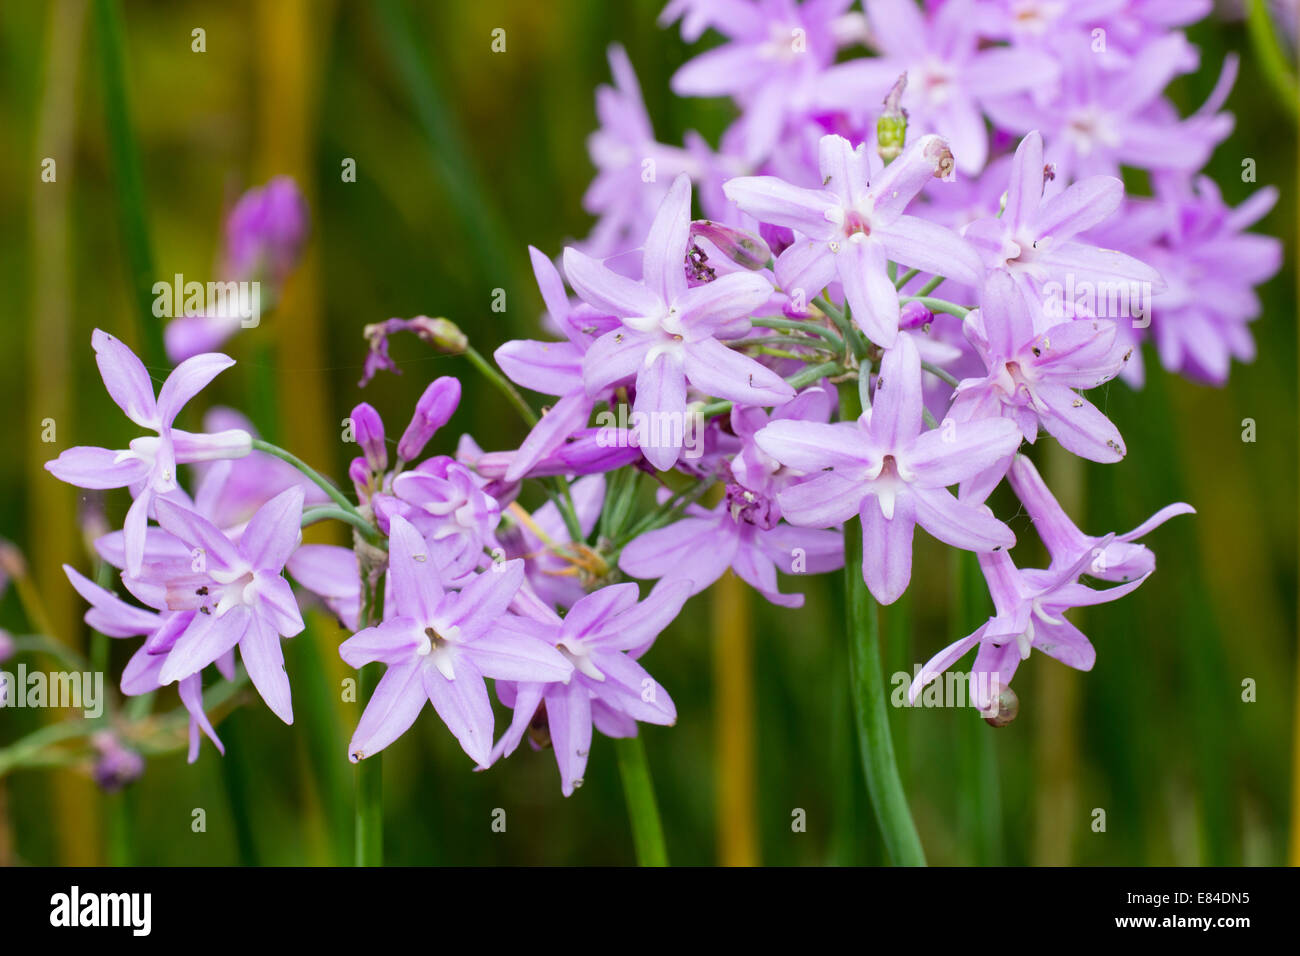 Close up of the flower heads of Tulbaghia violacea Stock Photo